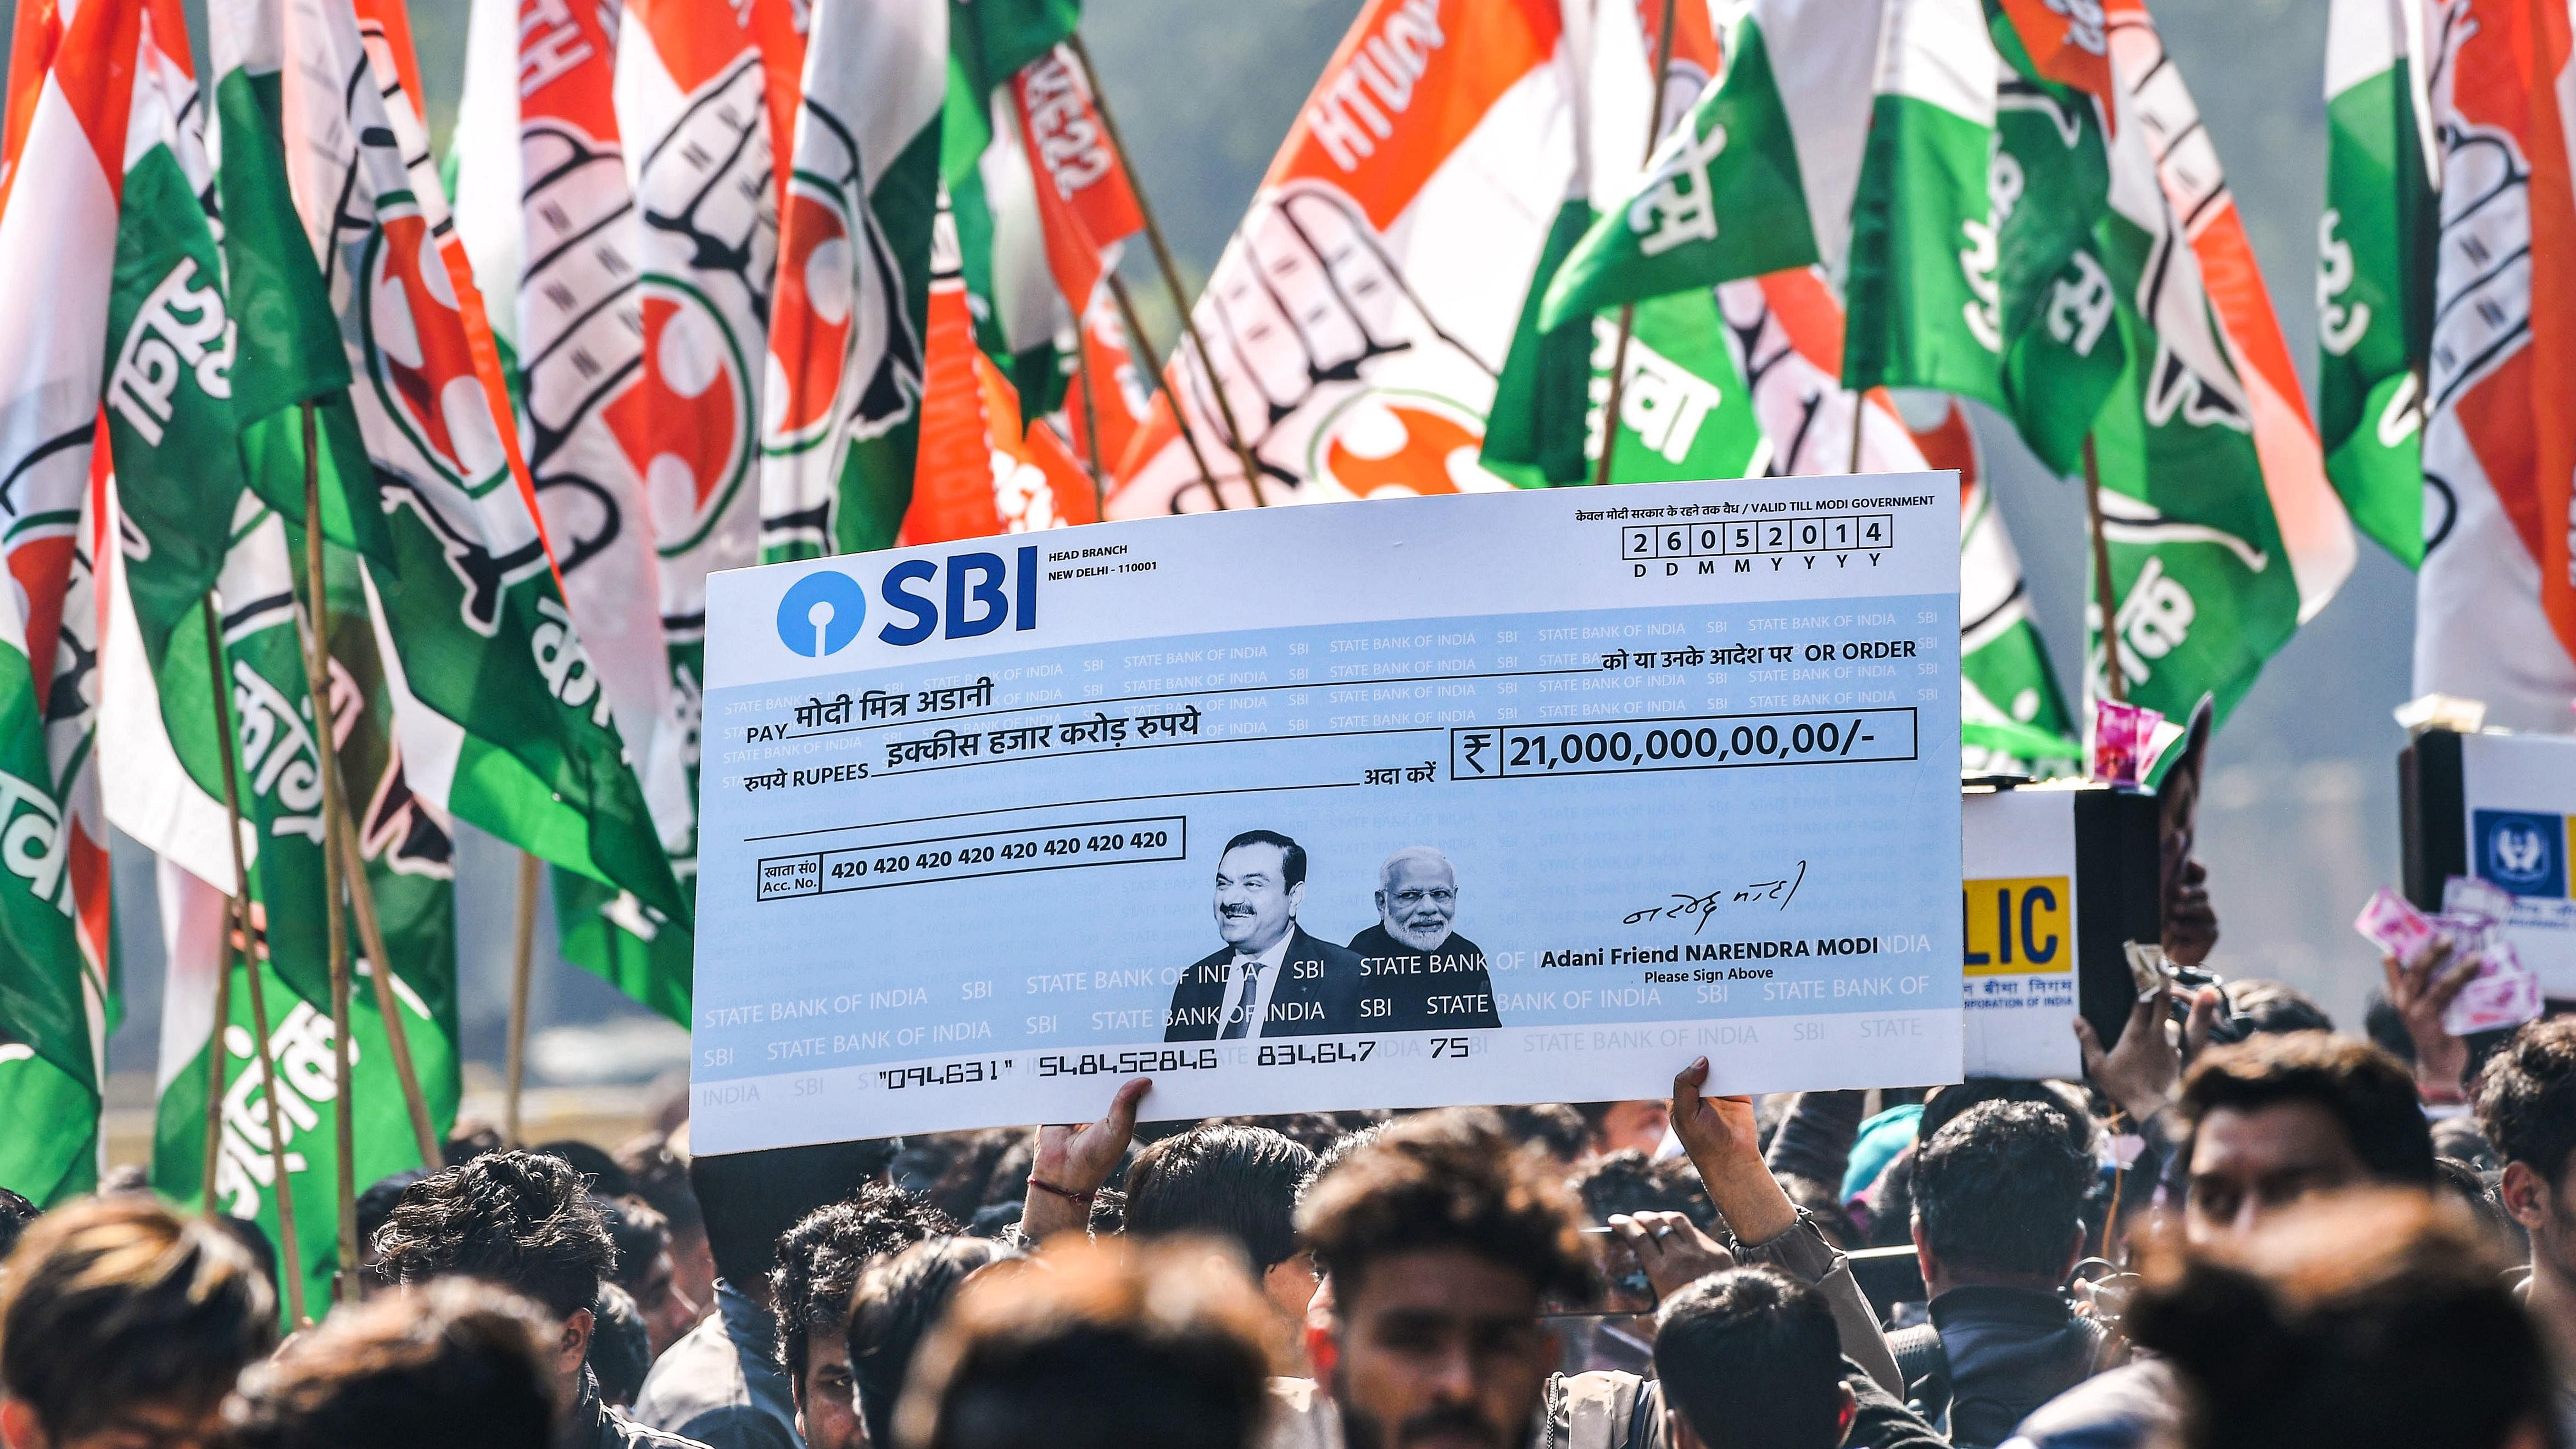 Indian Youth Congress activists stage a protest over the impact on LIC and SBI investors due to Adani row, at Jantar Mantar in New Delhi. Credit: PTI Photo